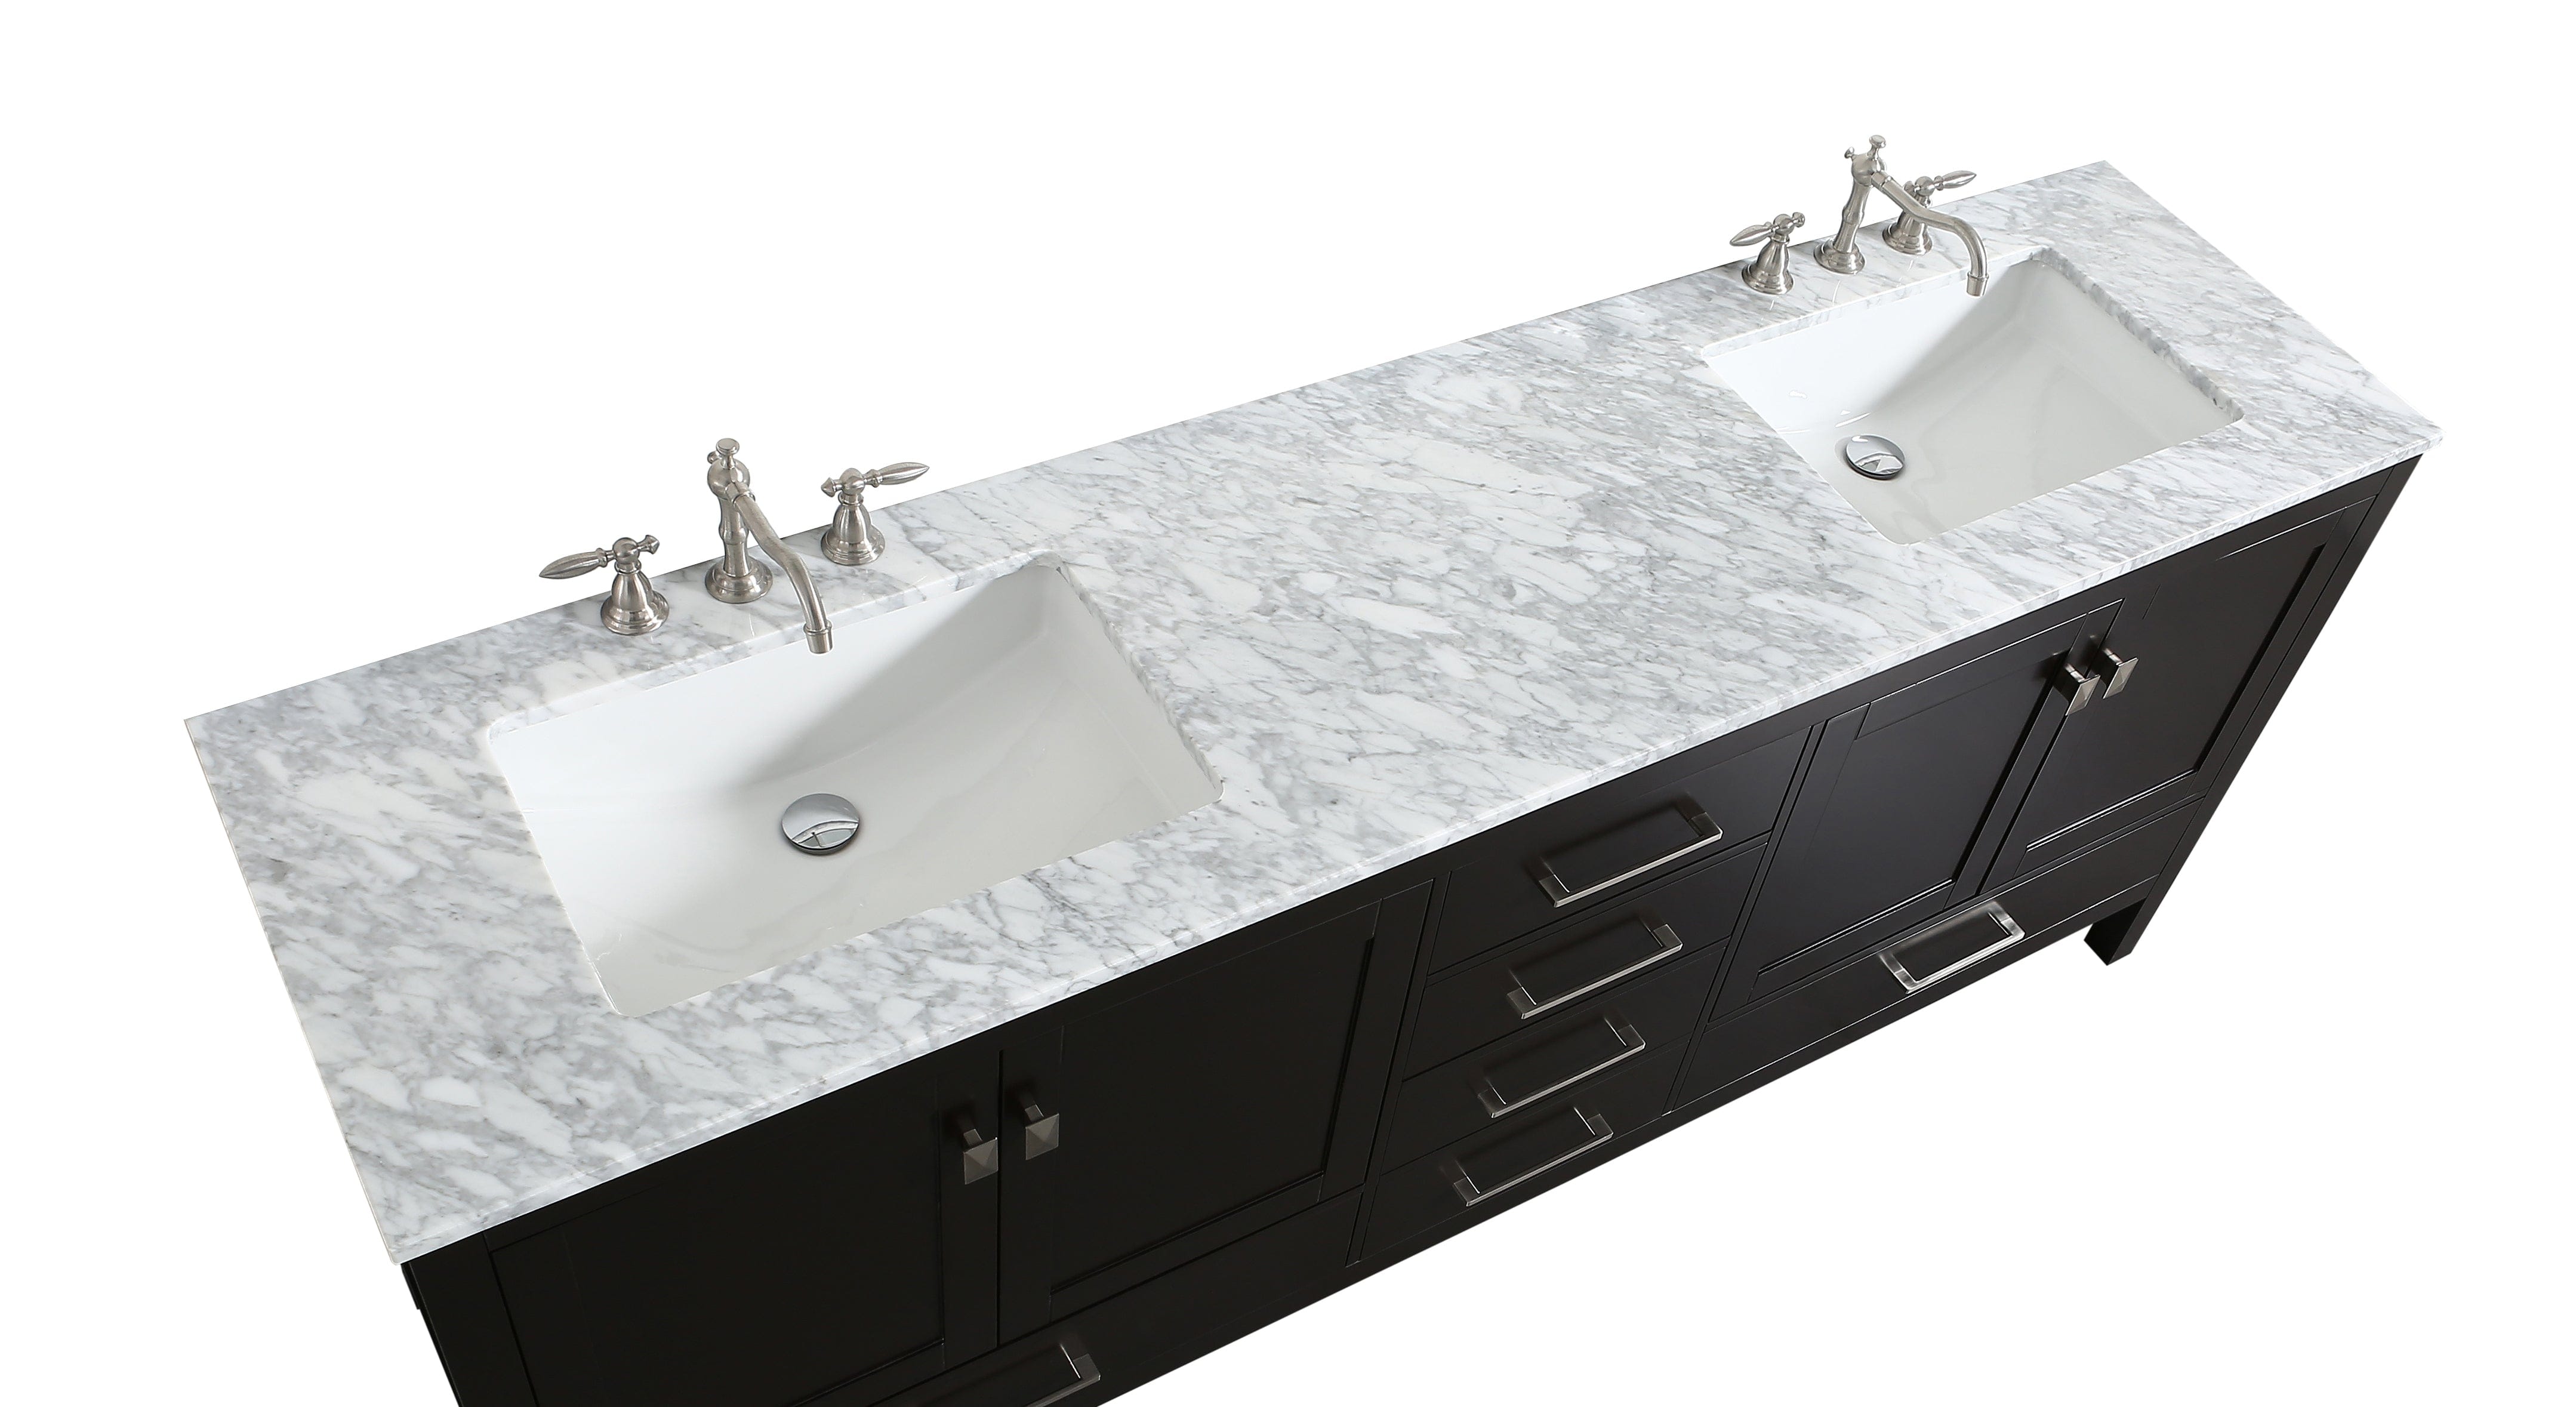 Eviva Aberdeen 84" Espresso Transitional Double Sink Bathroom Vanity with White Carrara Top